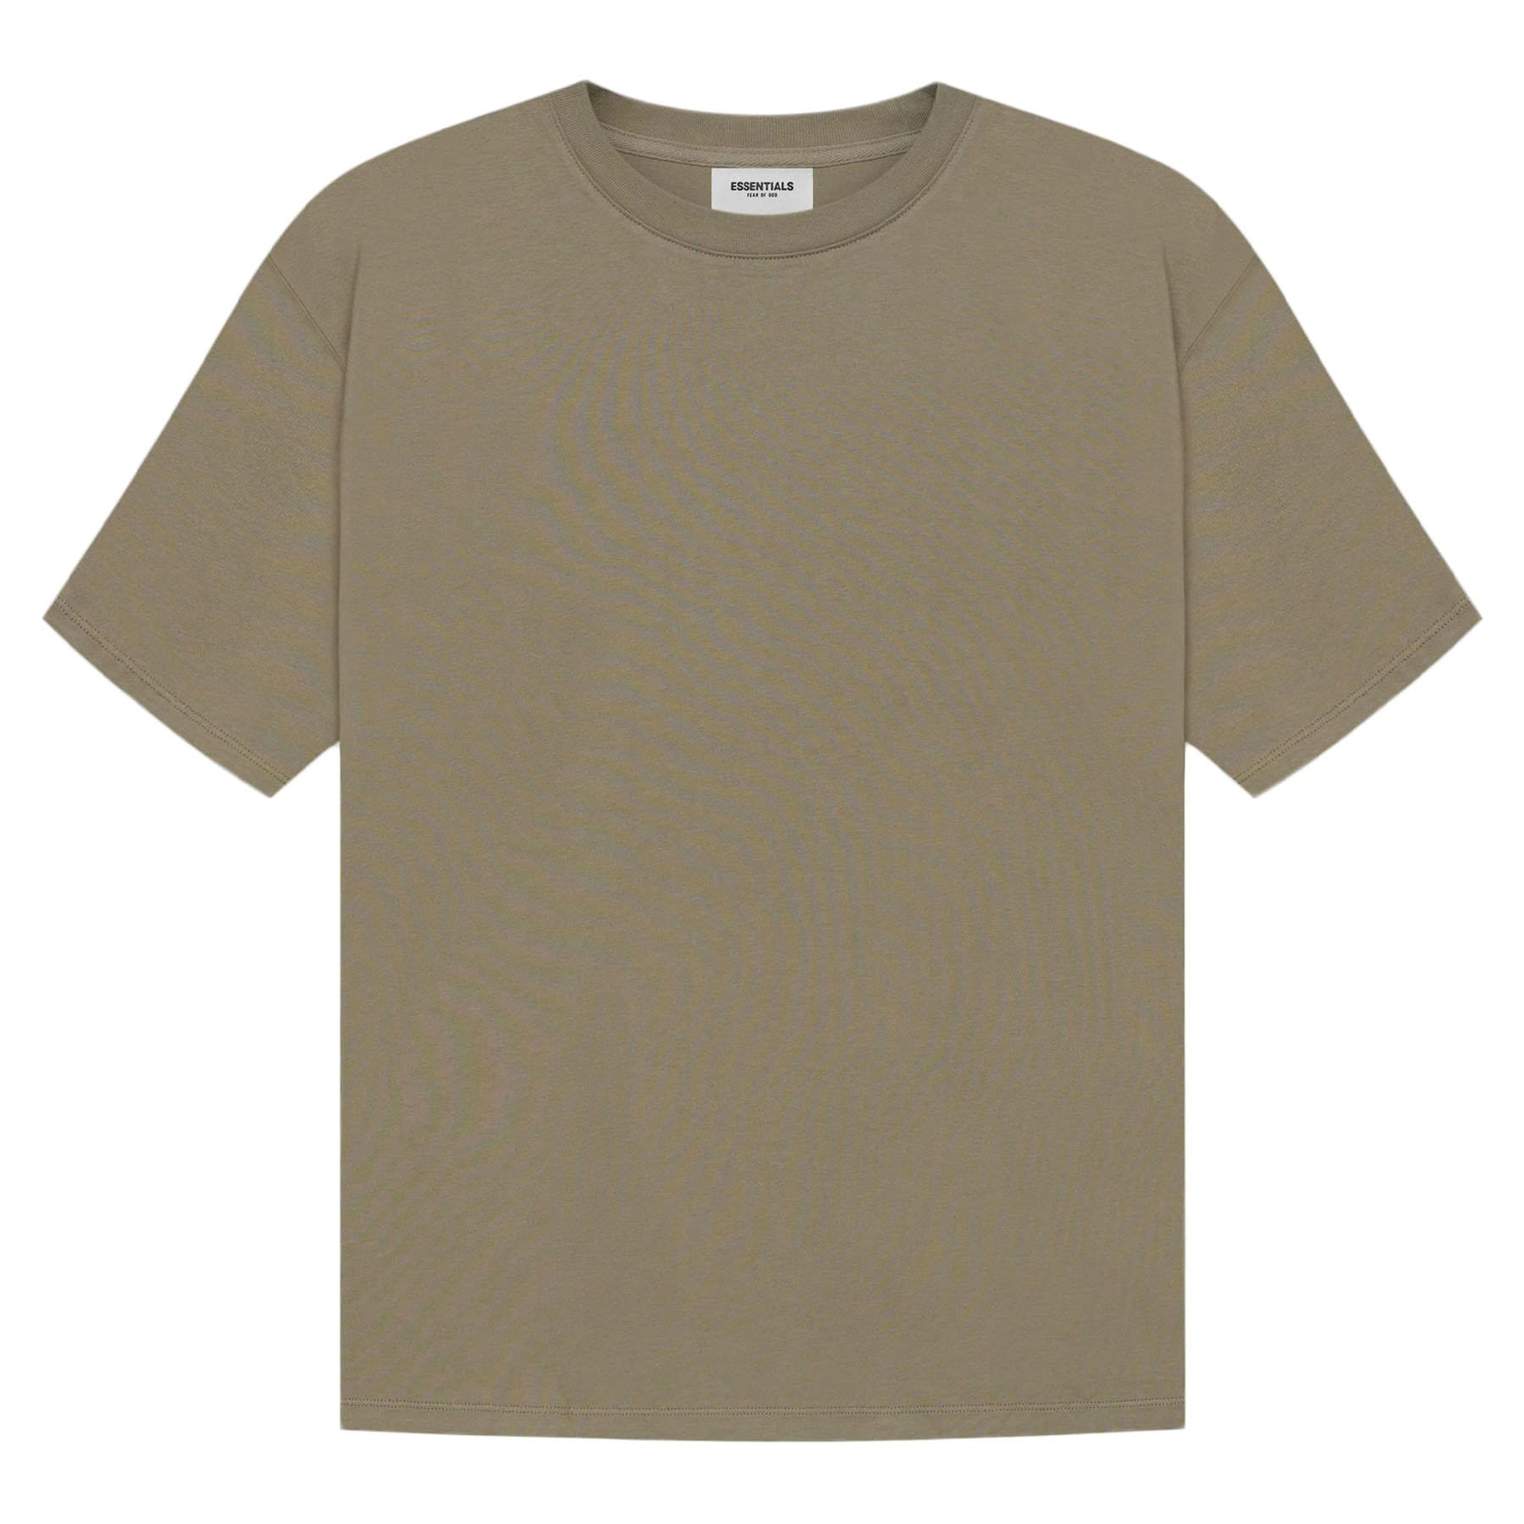 Double Boxed hoodie 119.99 FEAR OF GOD ESSENTIALS SS21 T-SHIRT TAUPE Double Boxed